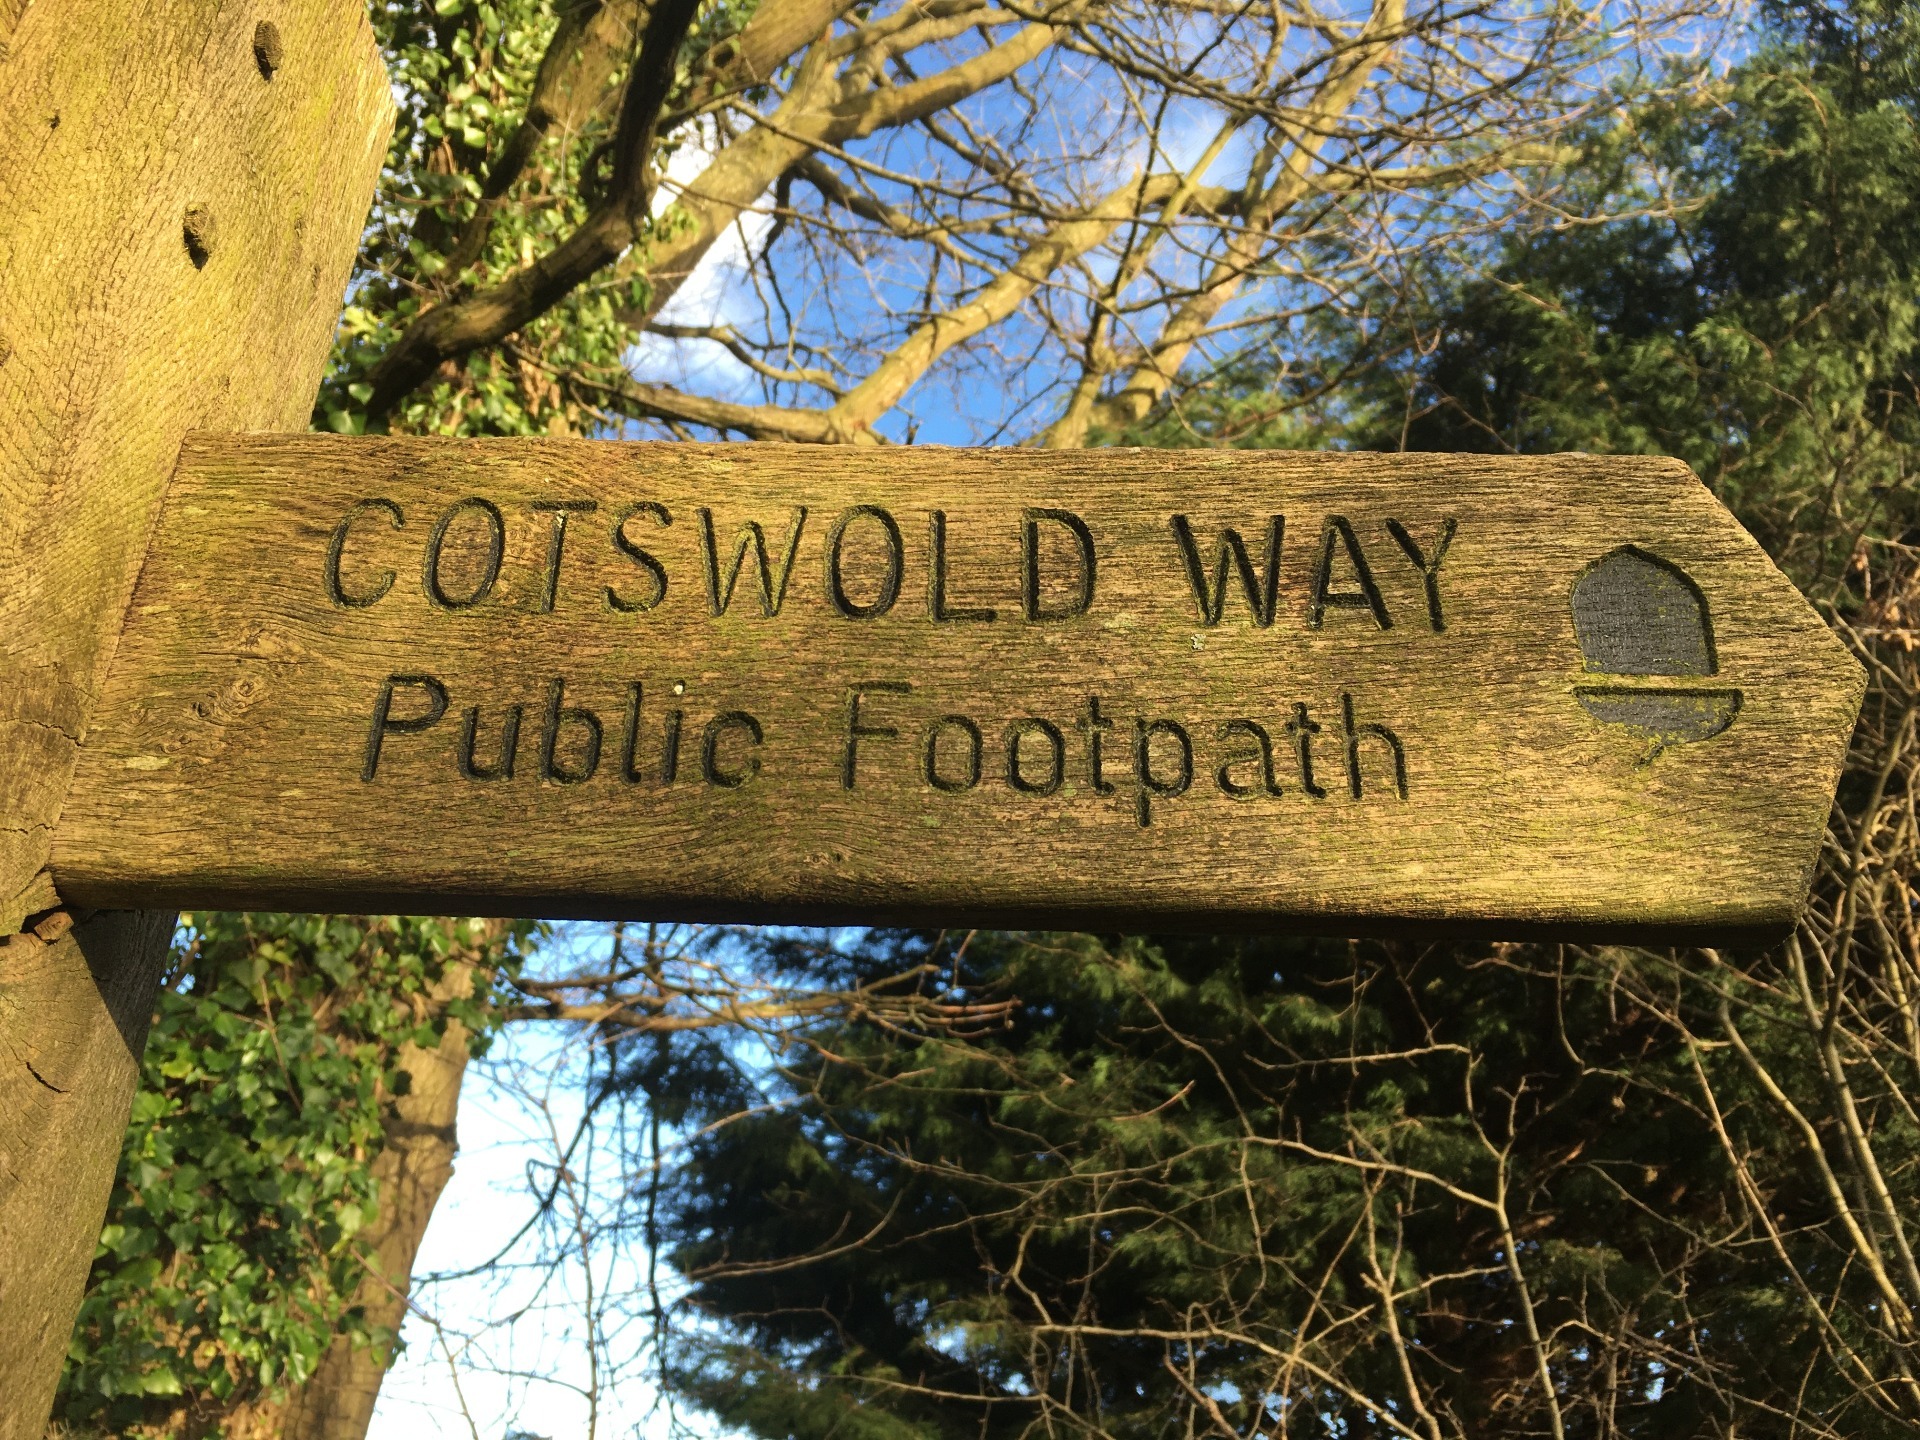 Cotswold Way sign